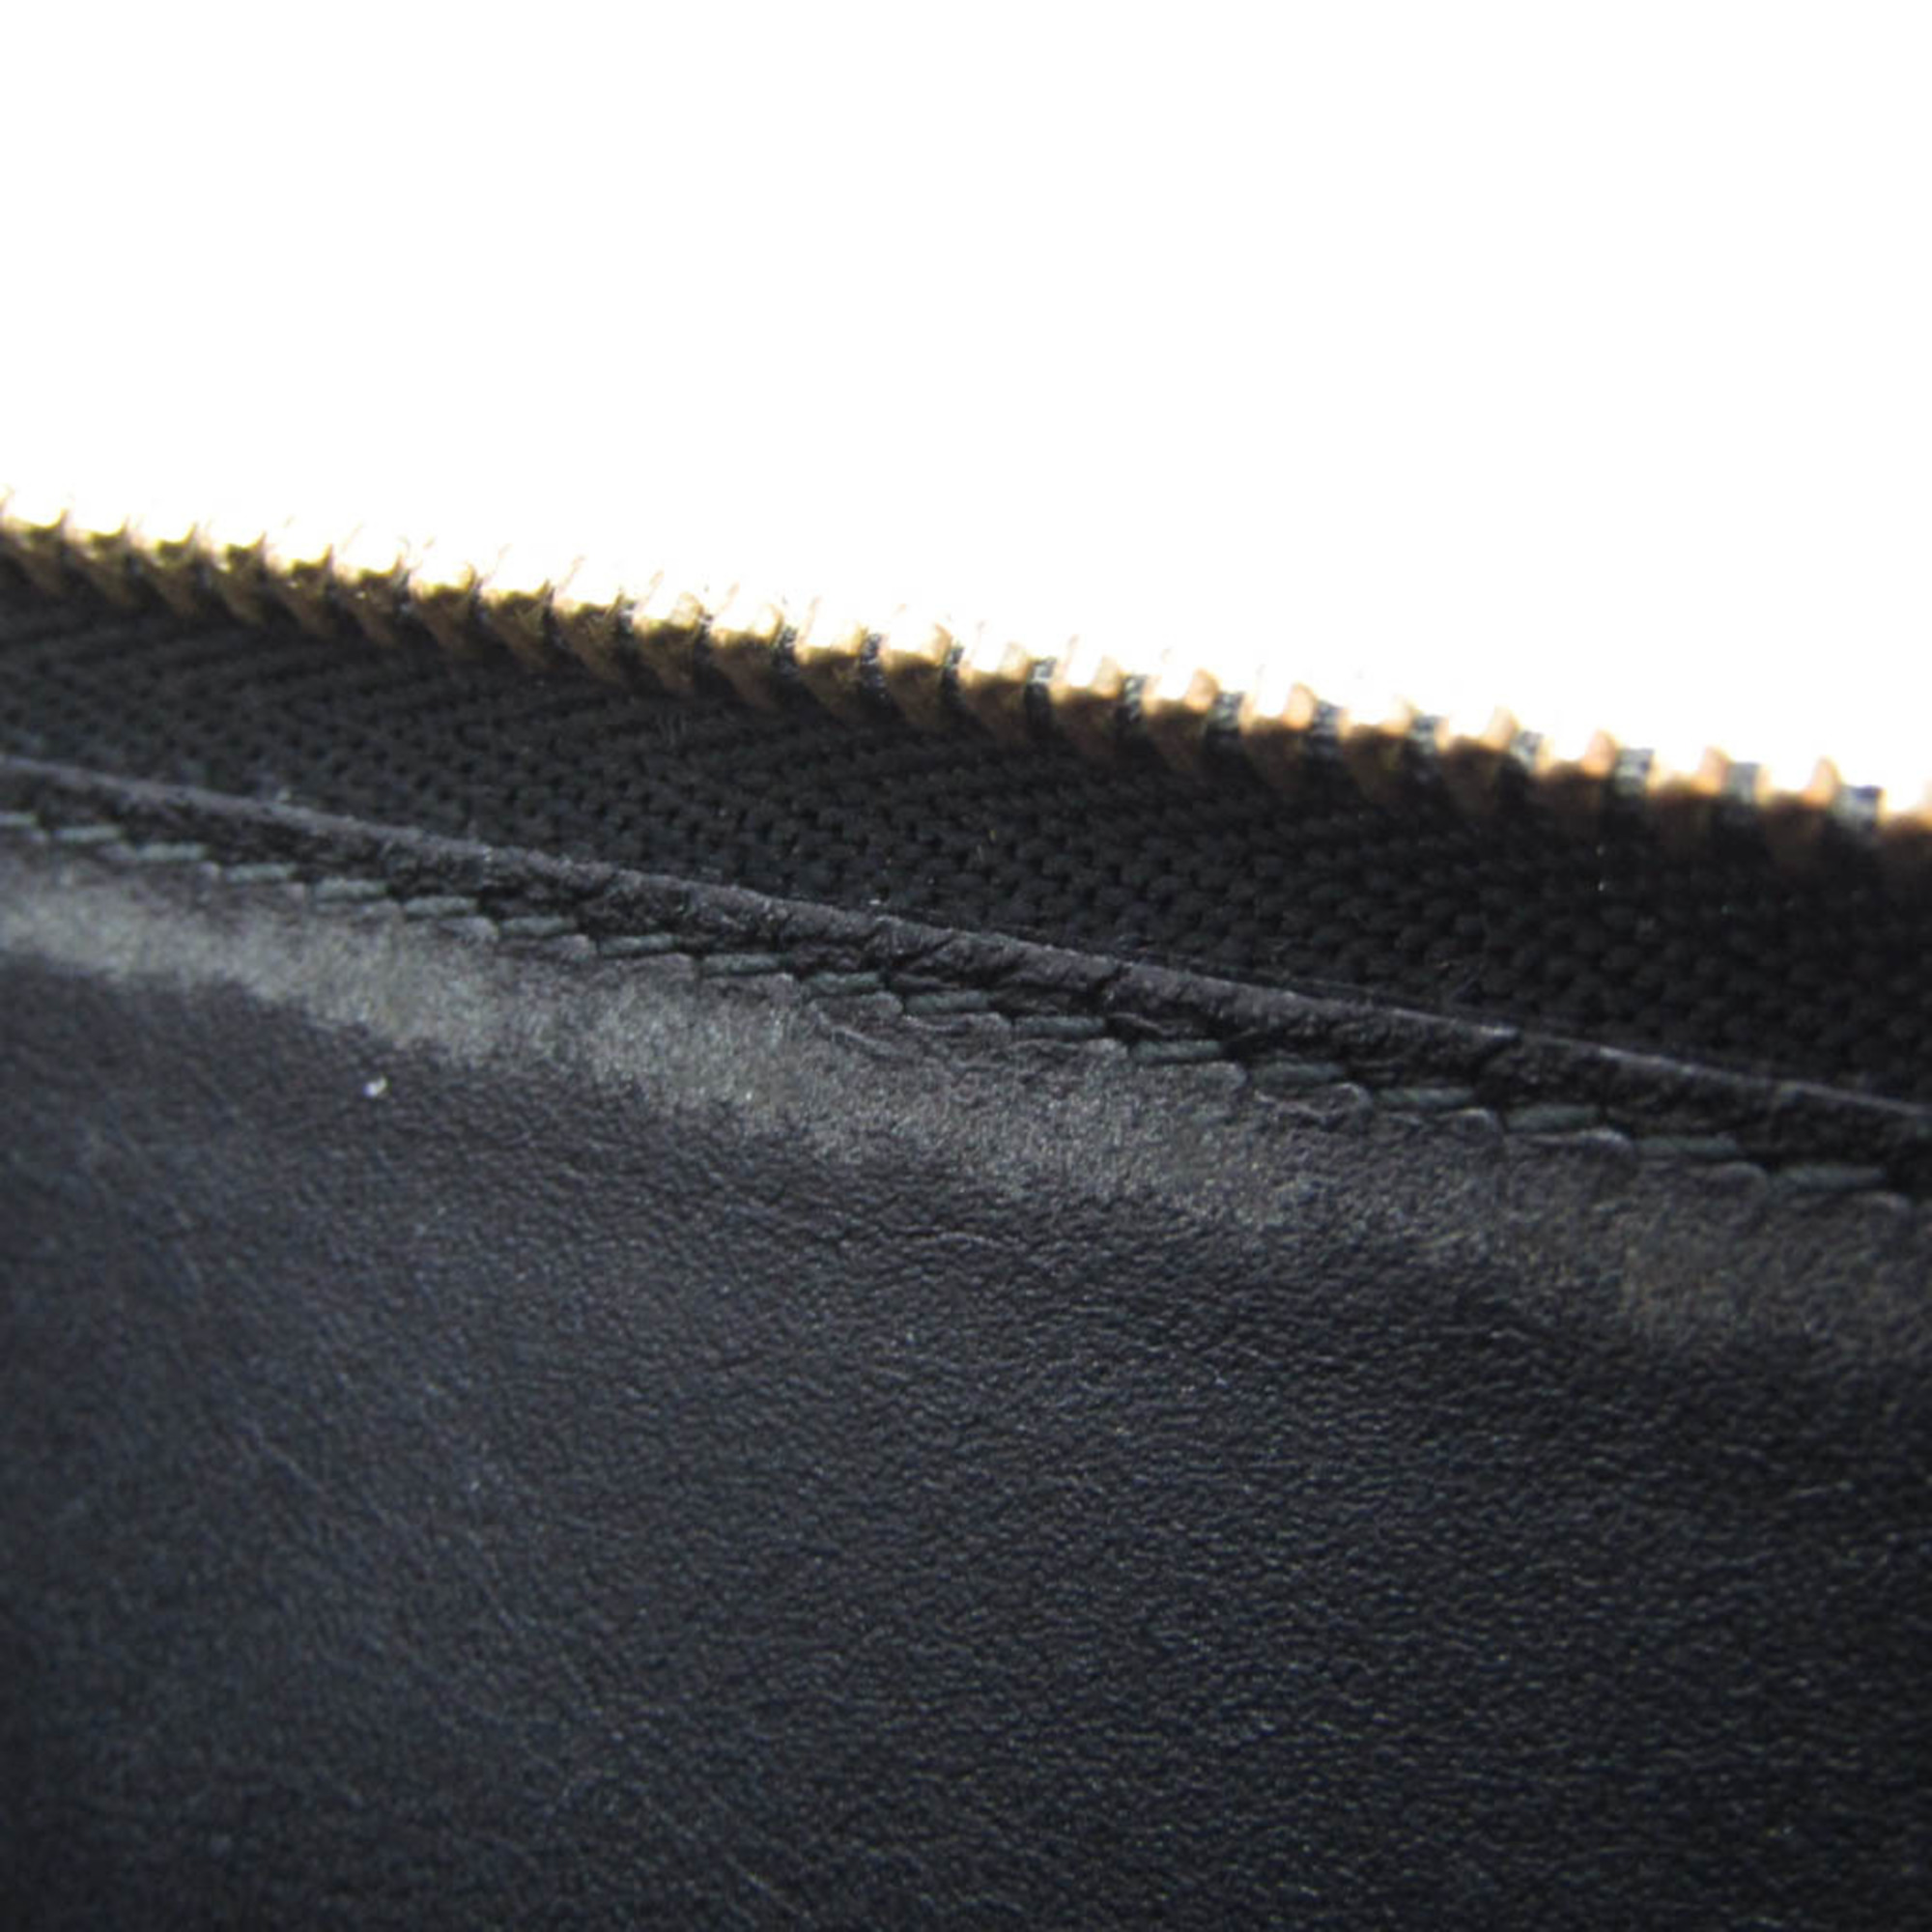 Loewe Linen Coin Purse Leather Card Case Black